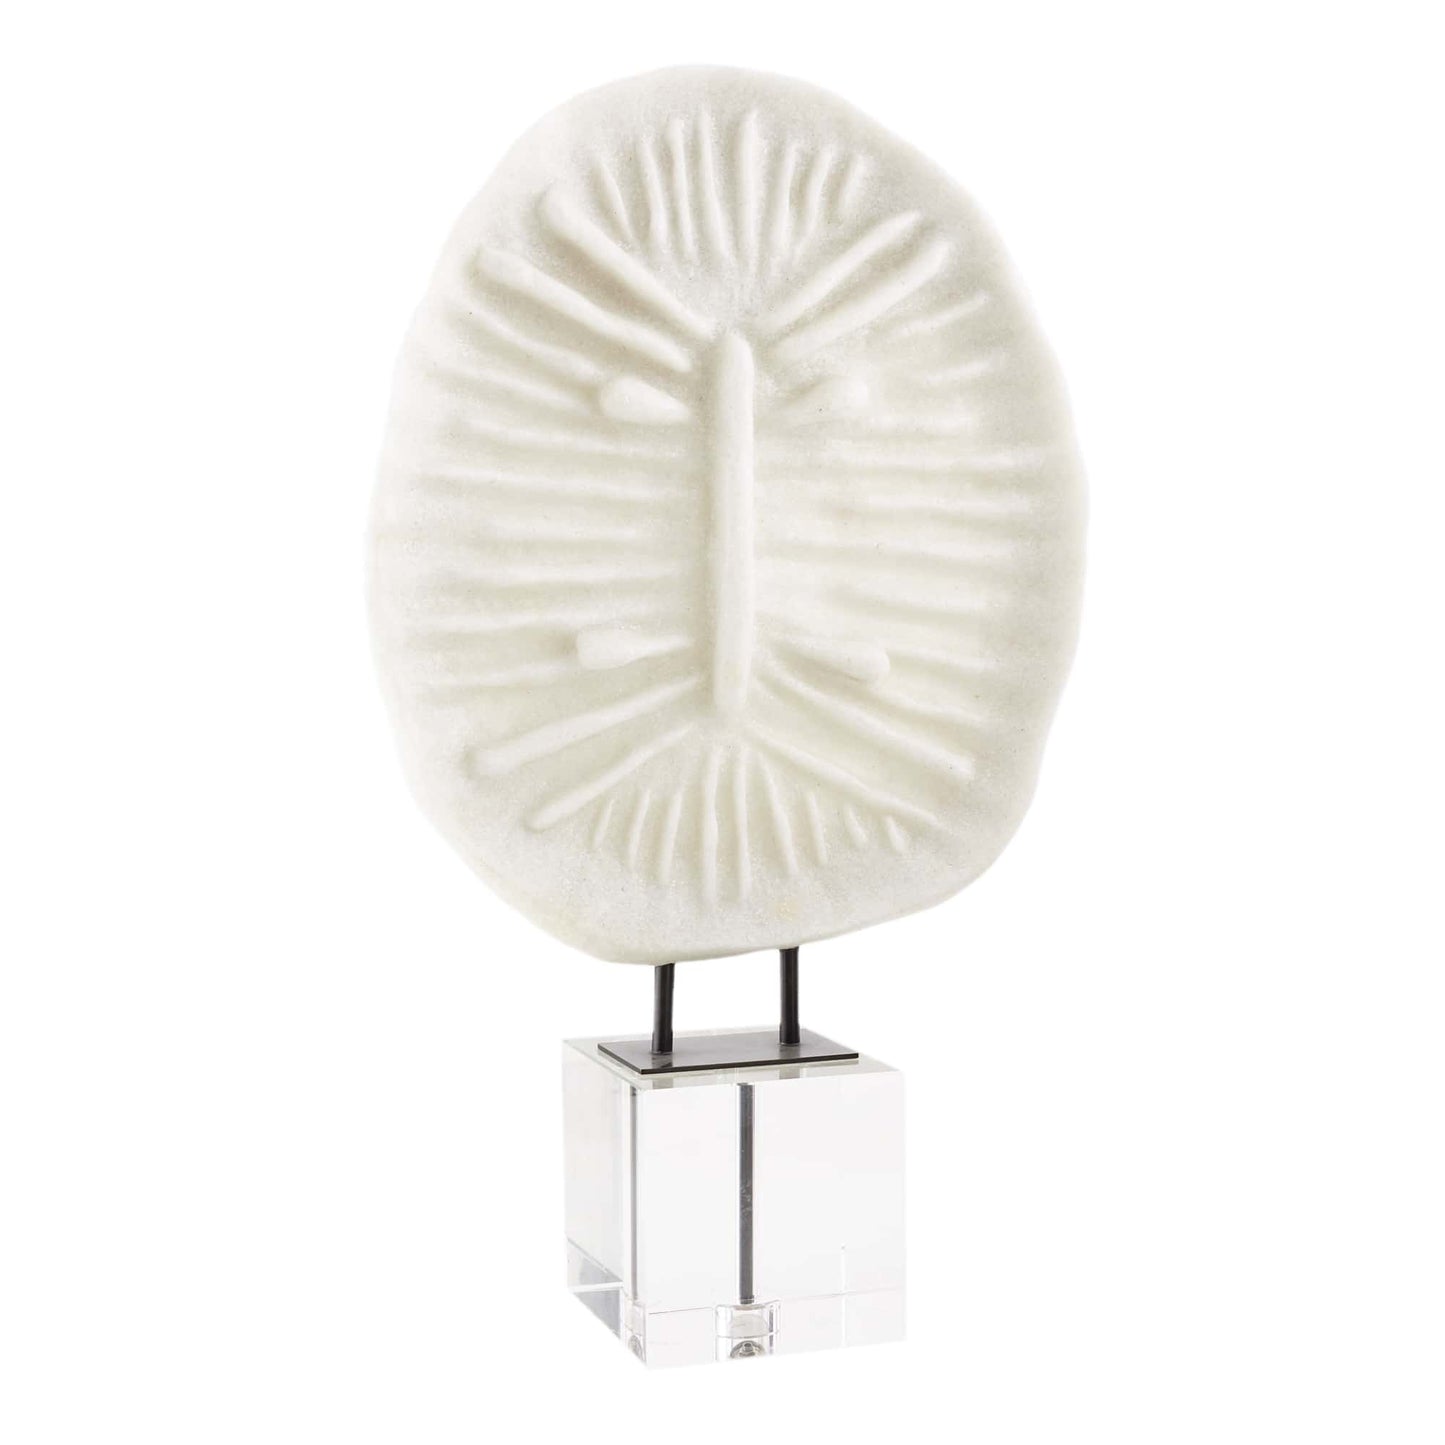 Hand-Carved Samirah Sculpture Inspired by African Shields - Ivory Ricestone Composite